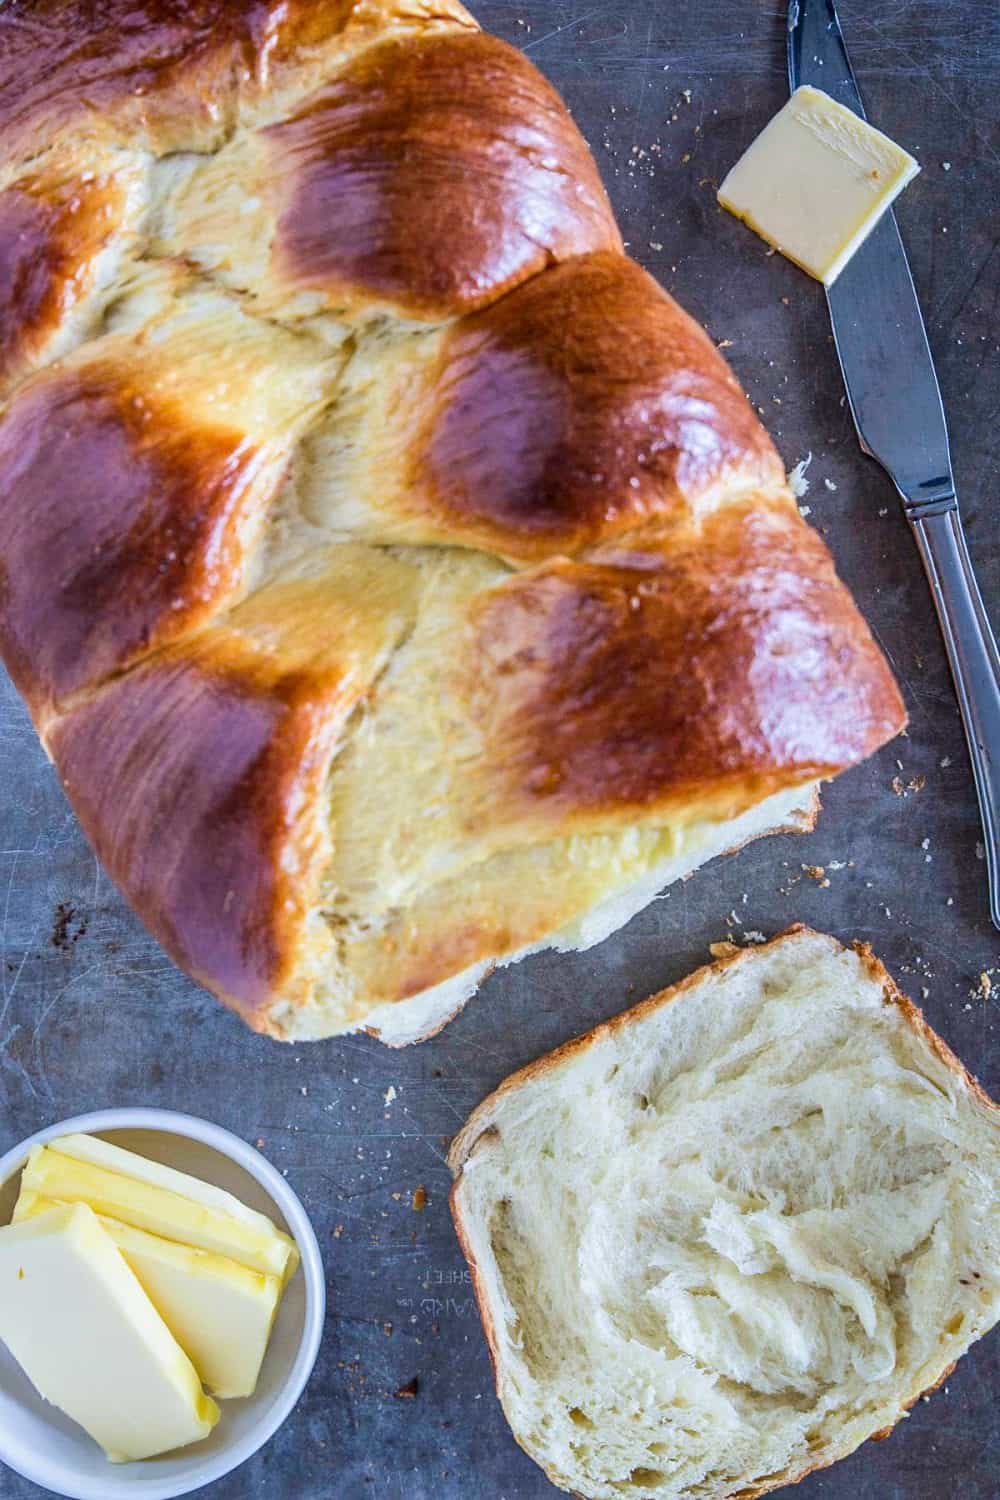 Buttery Brioche Bread Simply Home Cooked,Cracklings Brands